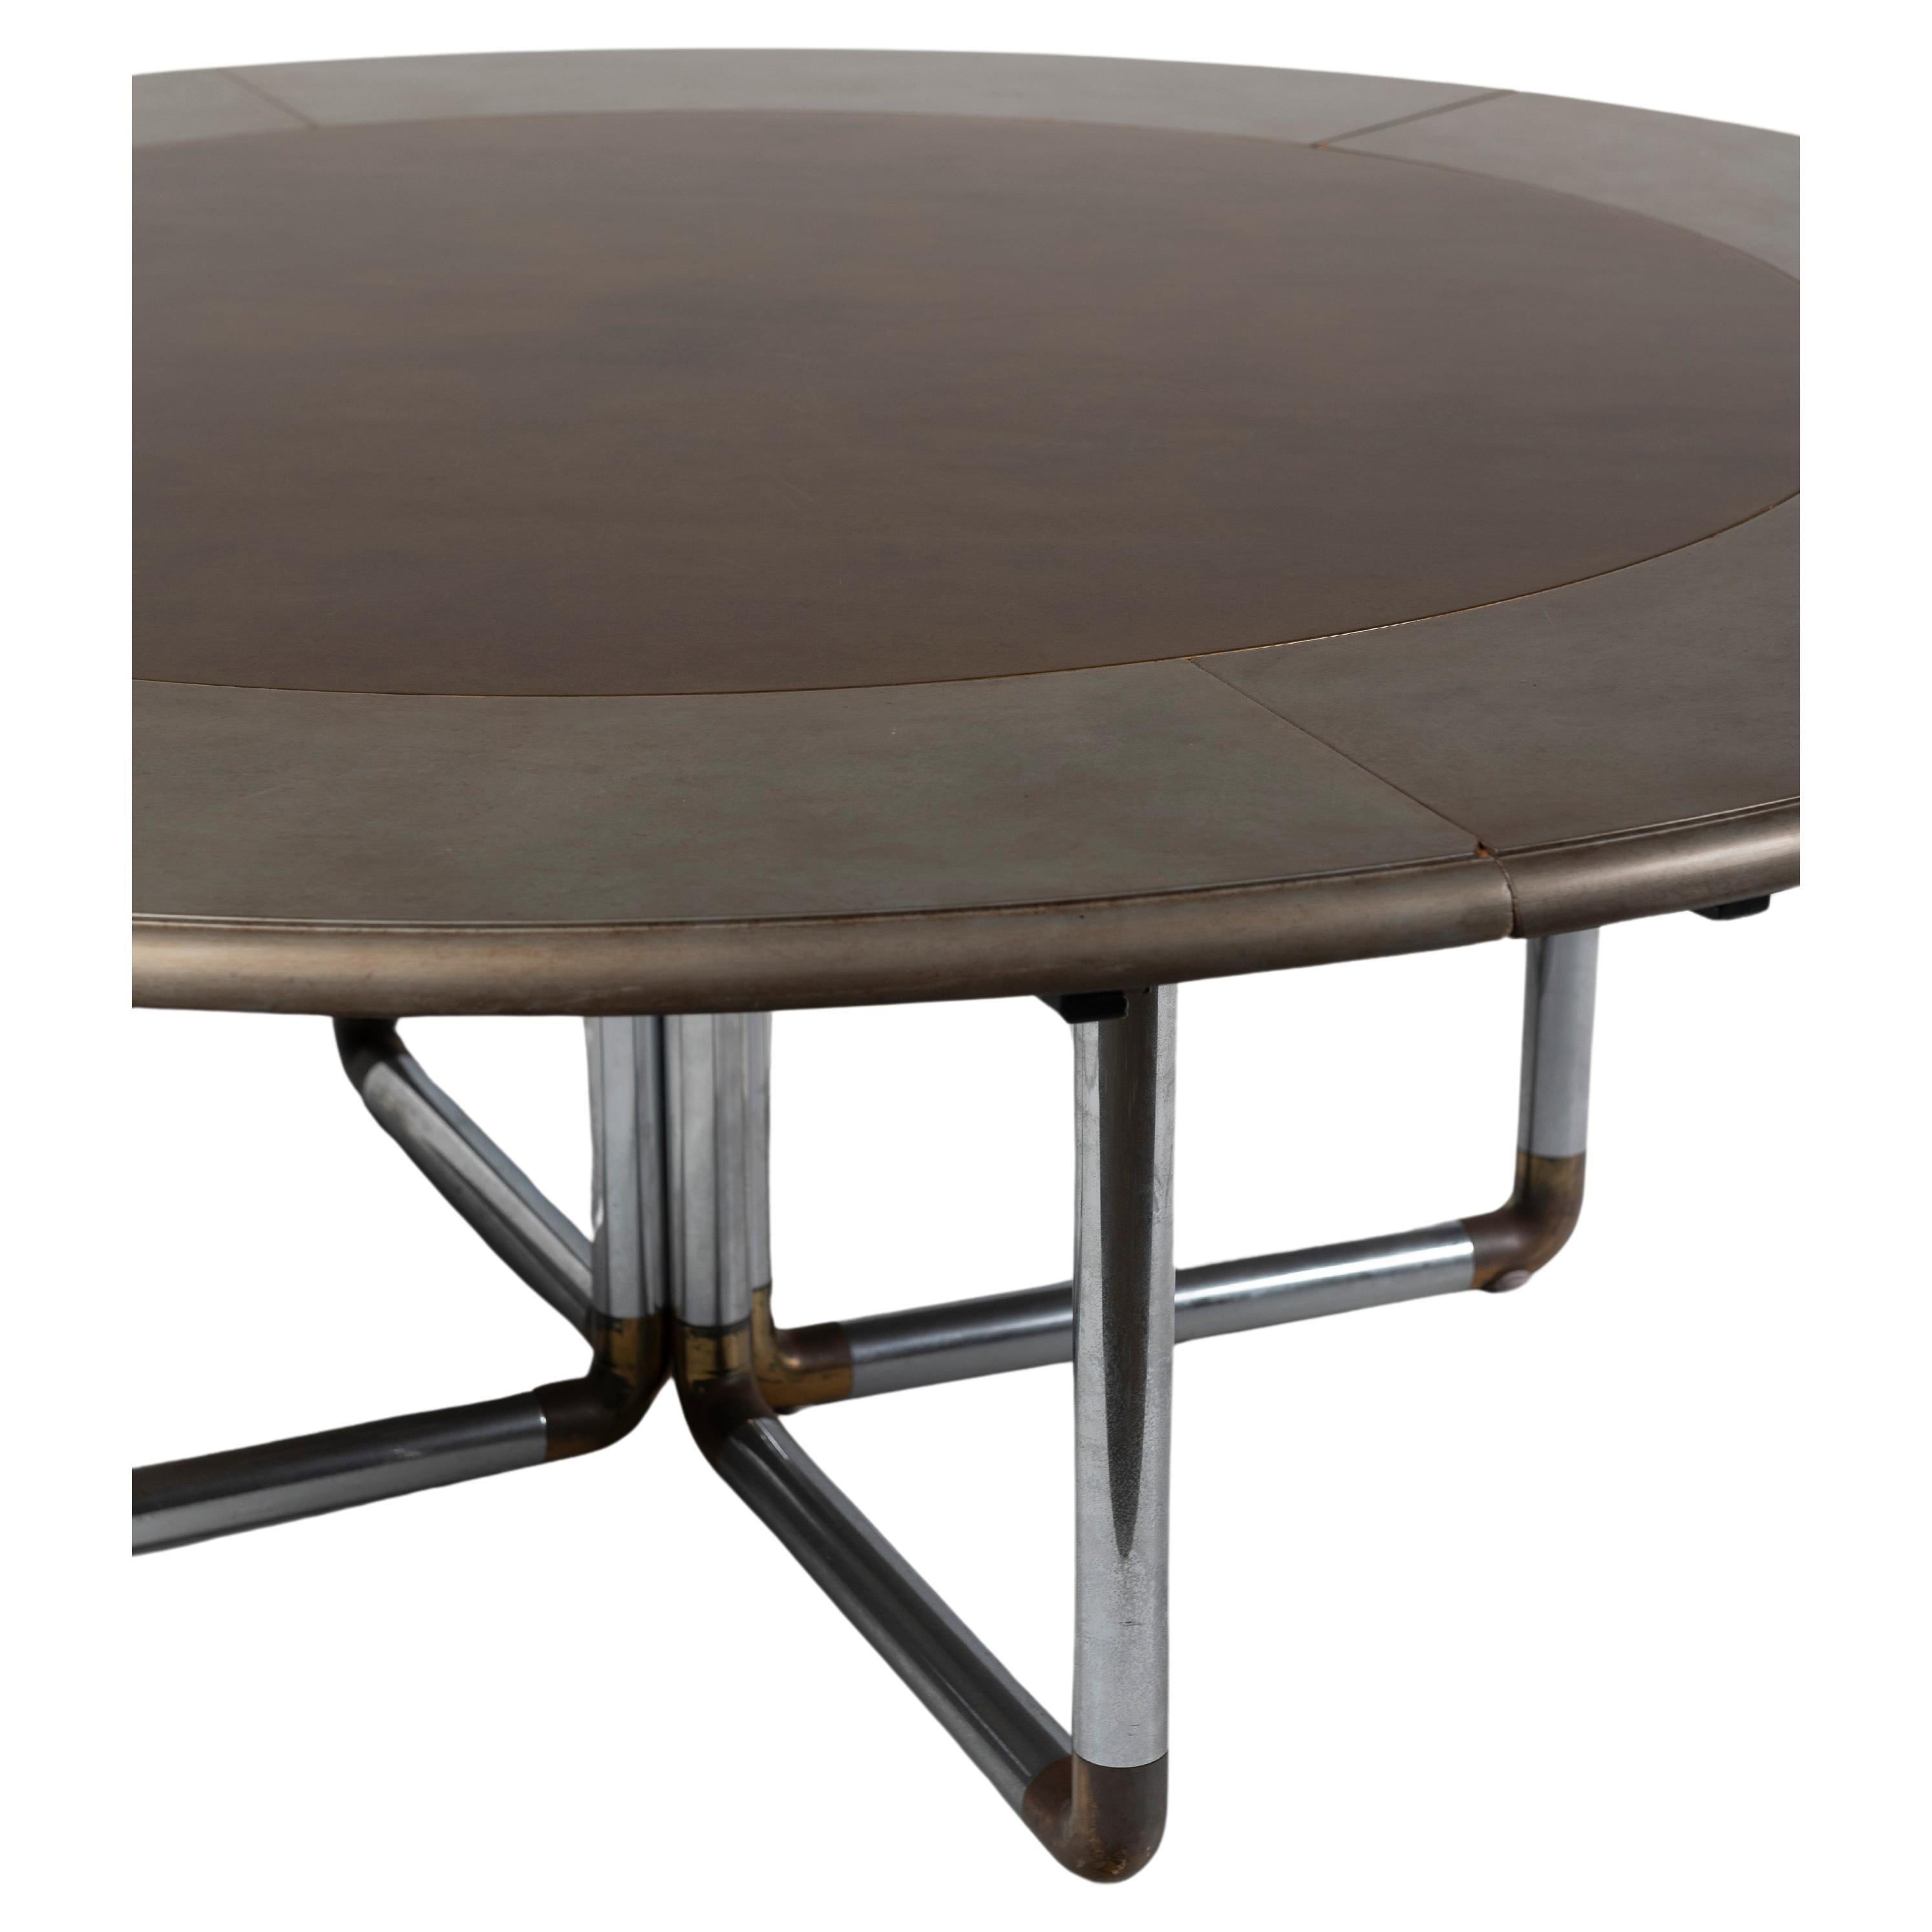 Super modern round dining table is of painted wood top and tubular chrome  with brass detailed base, measures 84